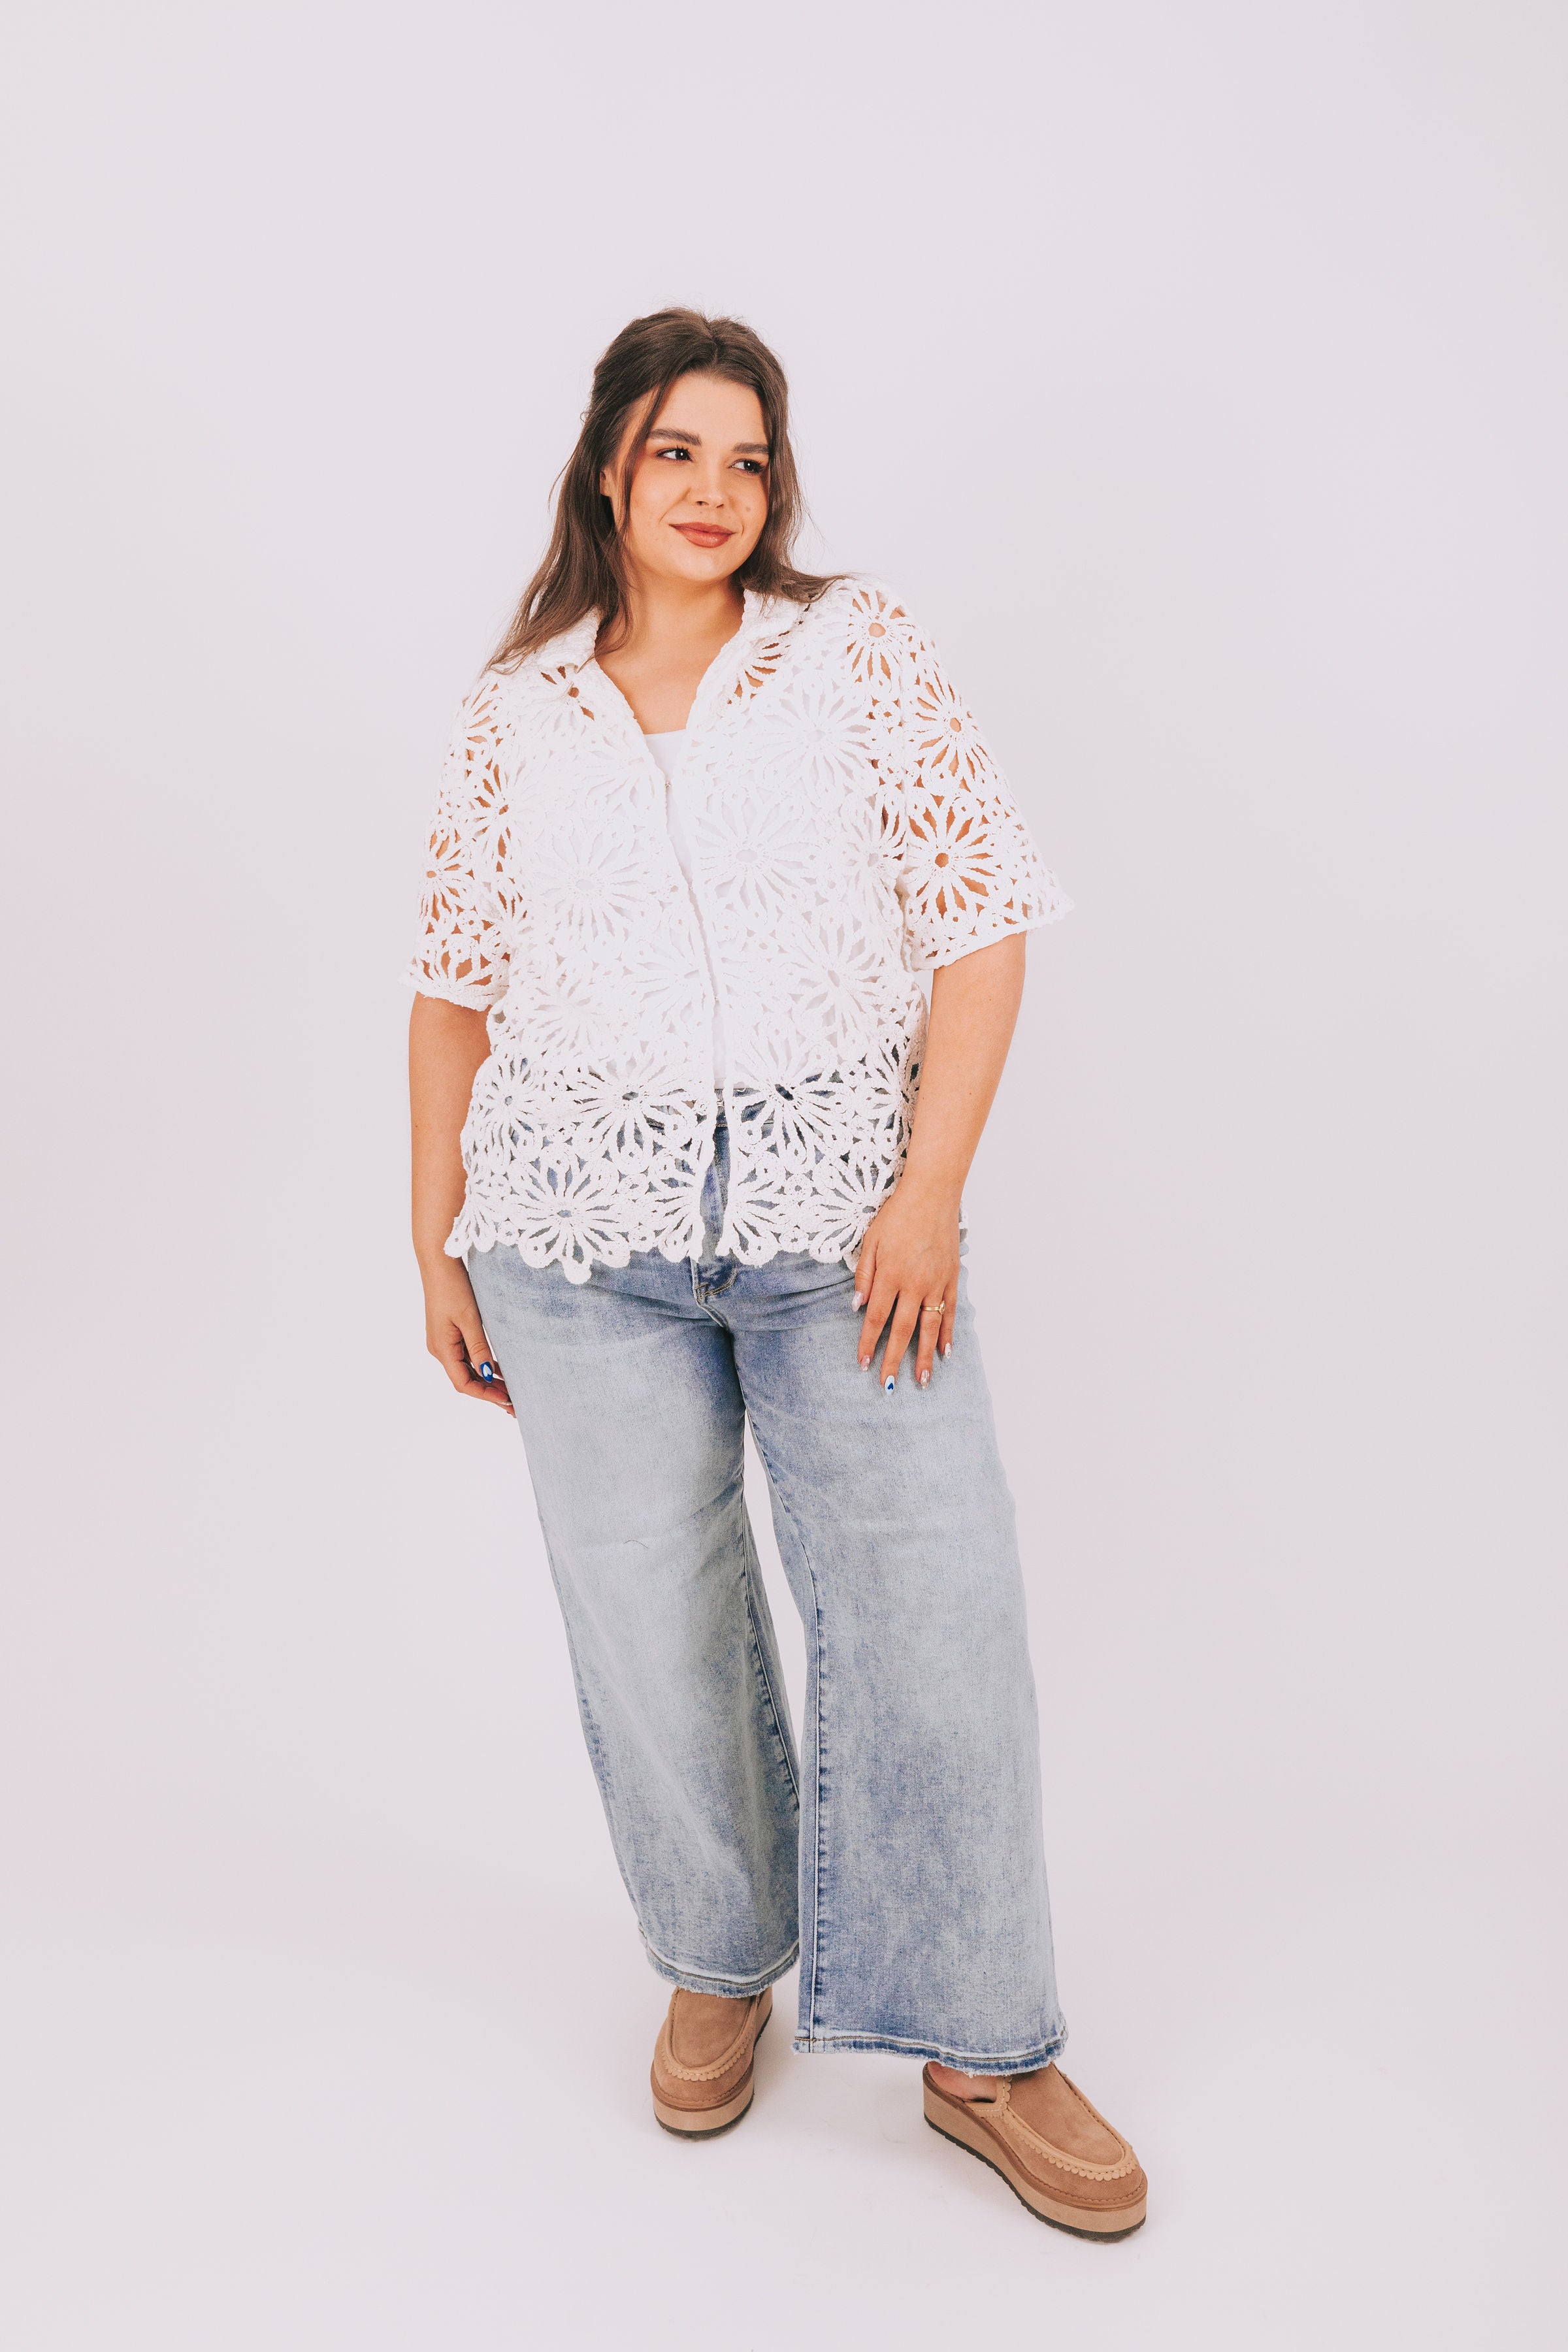 PLUS SIZE - Forget Me Not Top